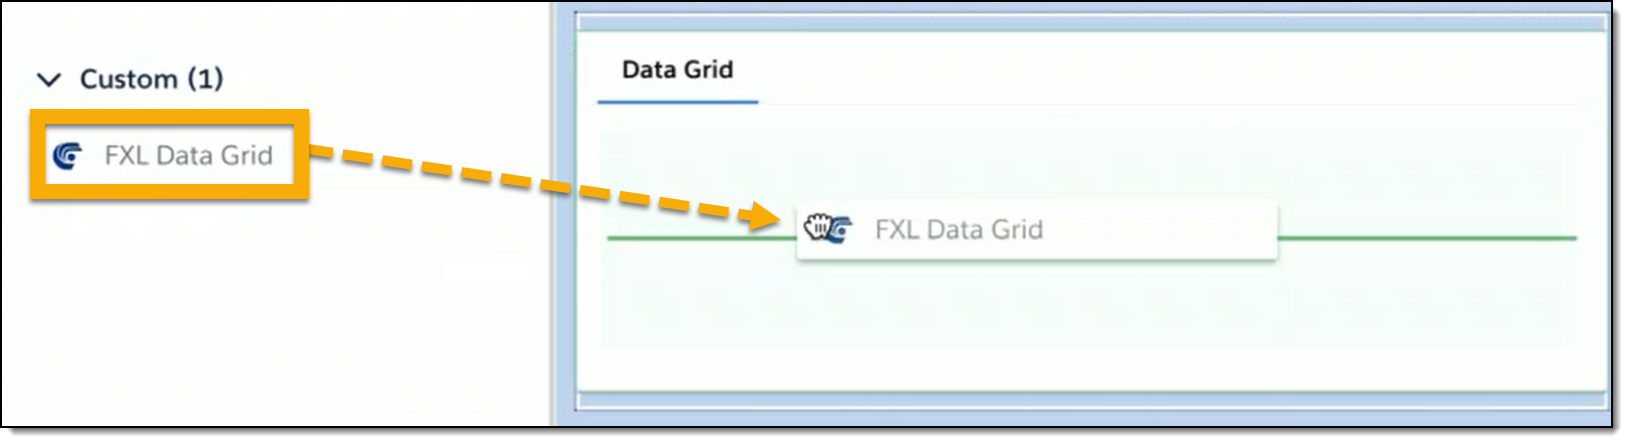 Example of dragging FXL Data Grid to the page